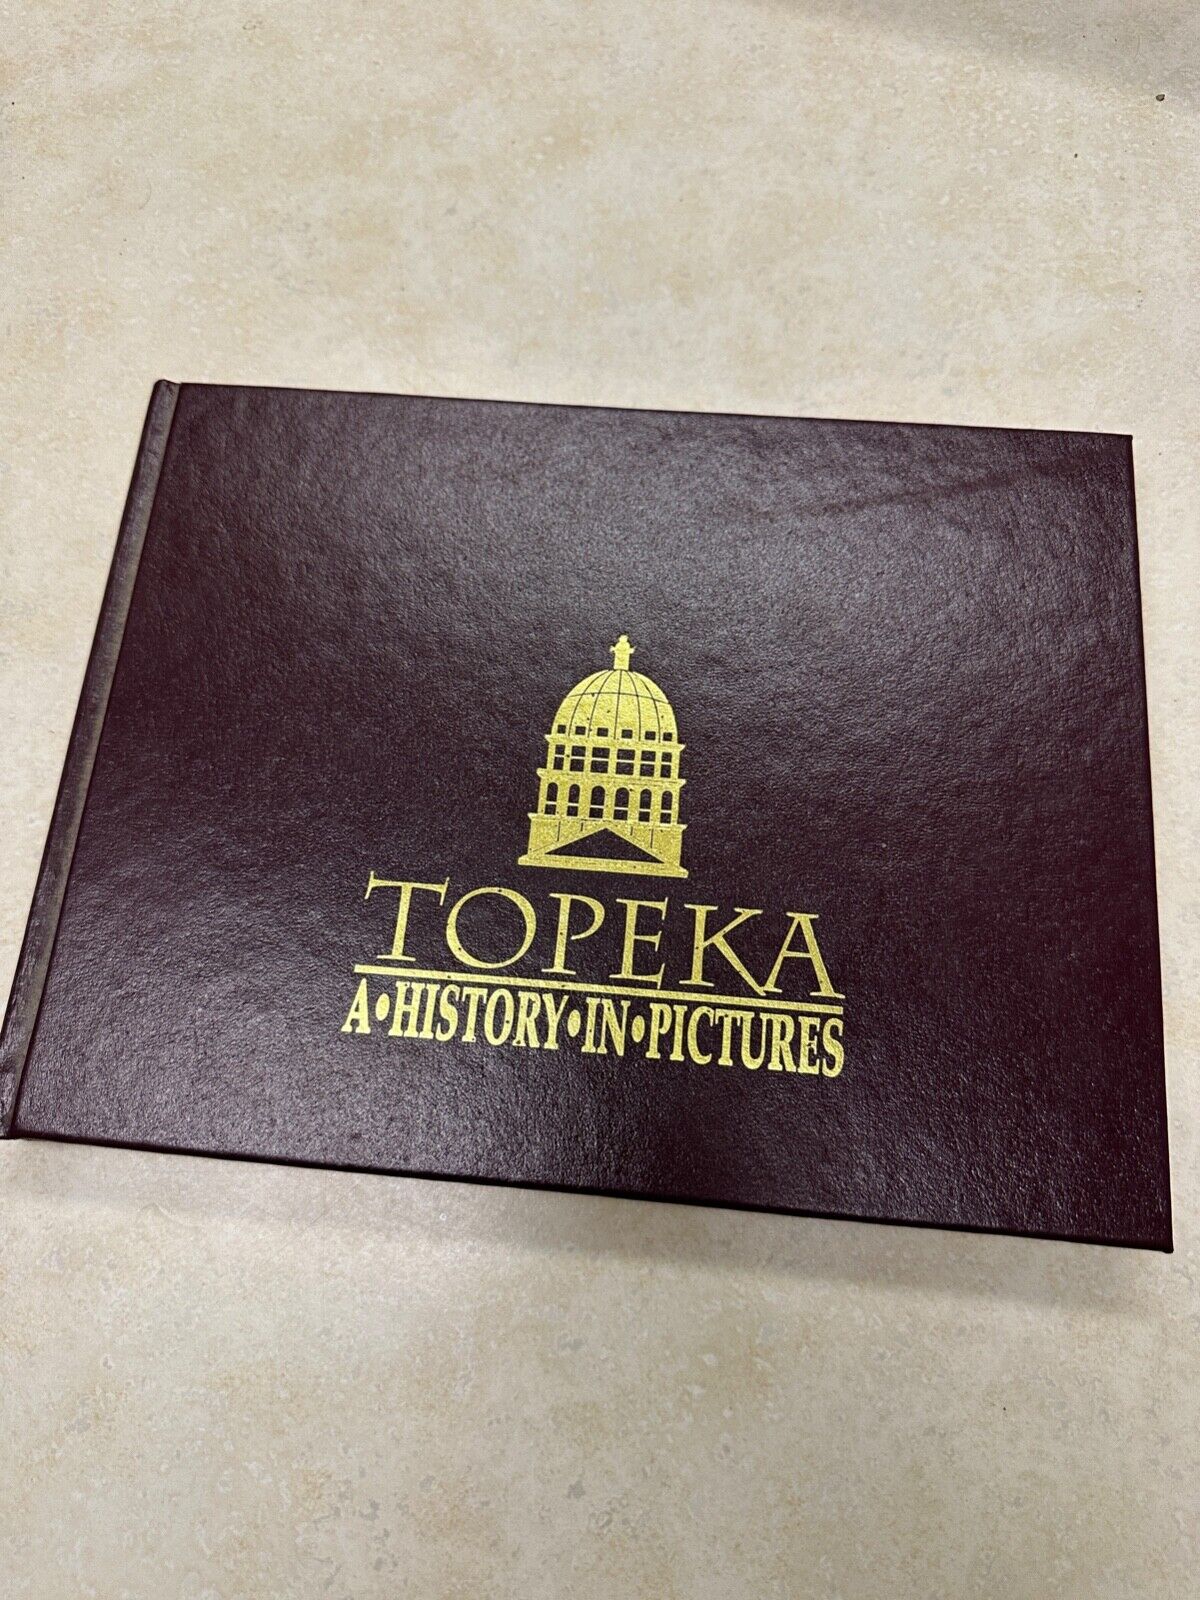 Topeka a History in Pictures - 2001 - 1st Edition